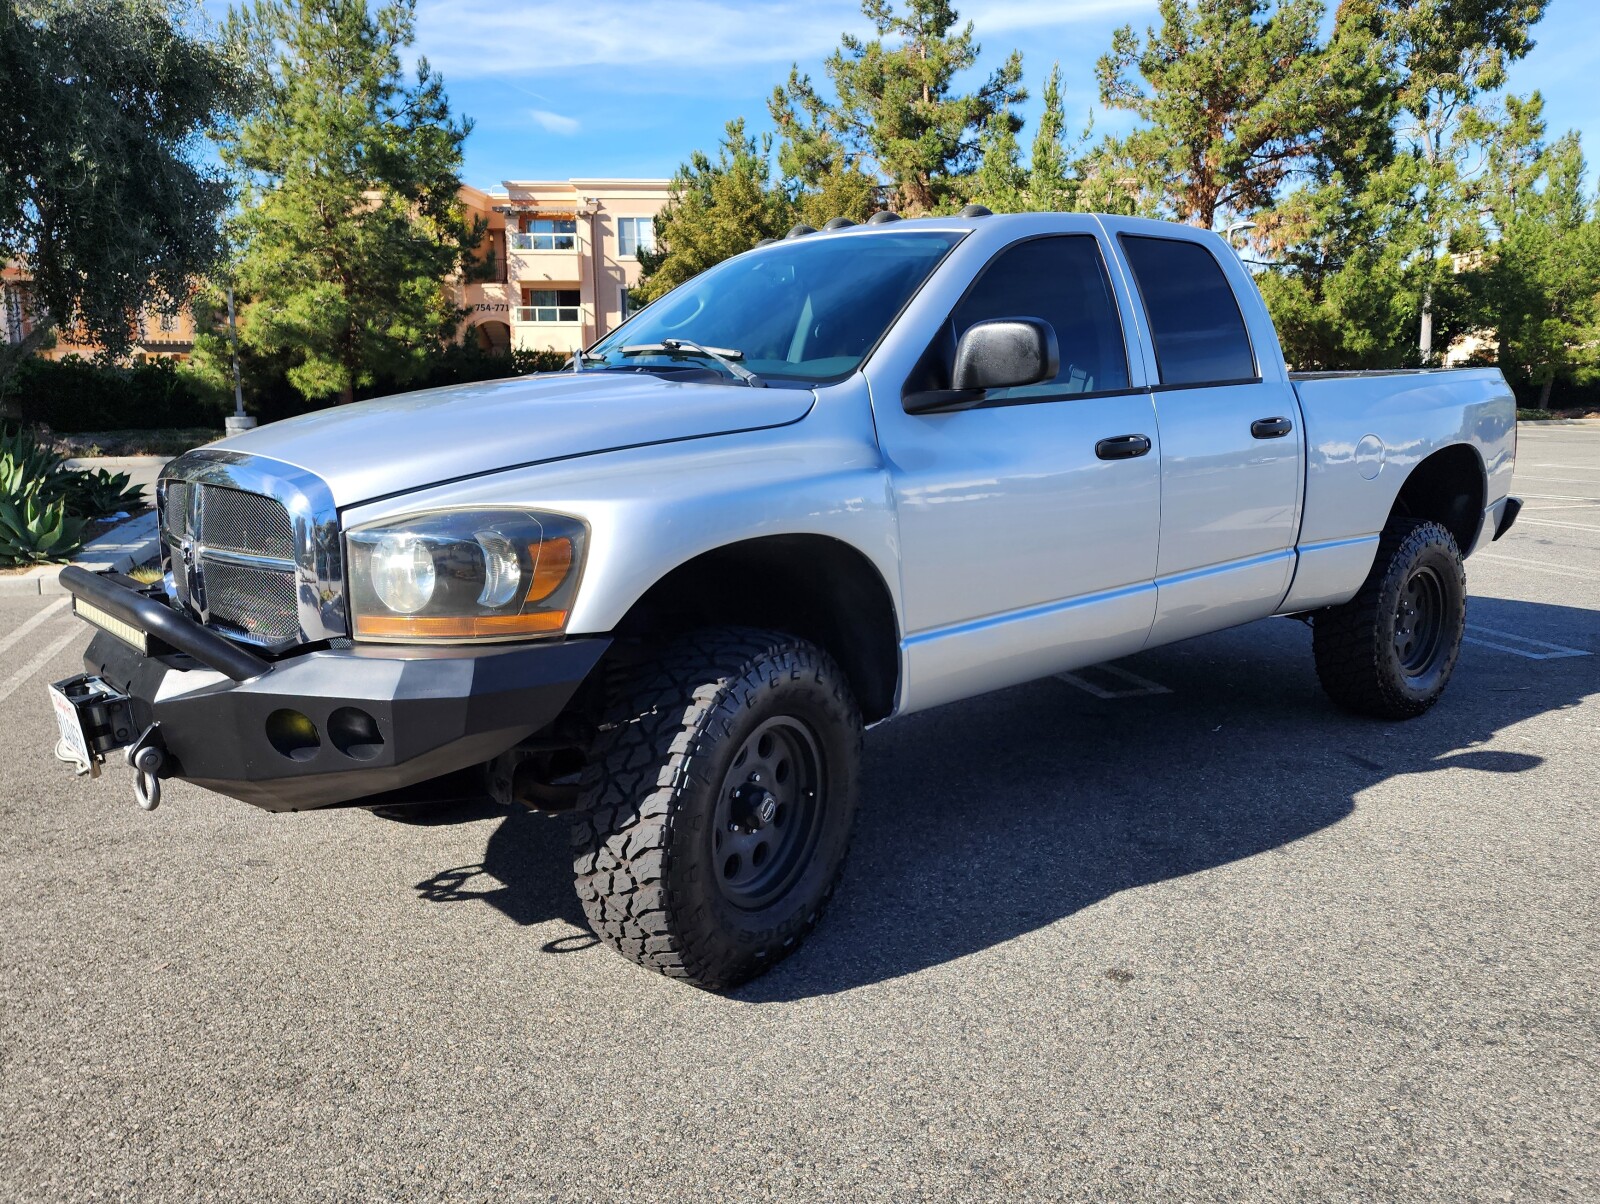 For Sale: *REDUCED* Clean 2006 Ram 1500 SLT 4x4 5.7L V8 | $20k+ UPGRADES | Well Maintained | Low Miles! - photo1